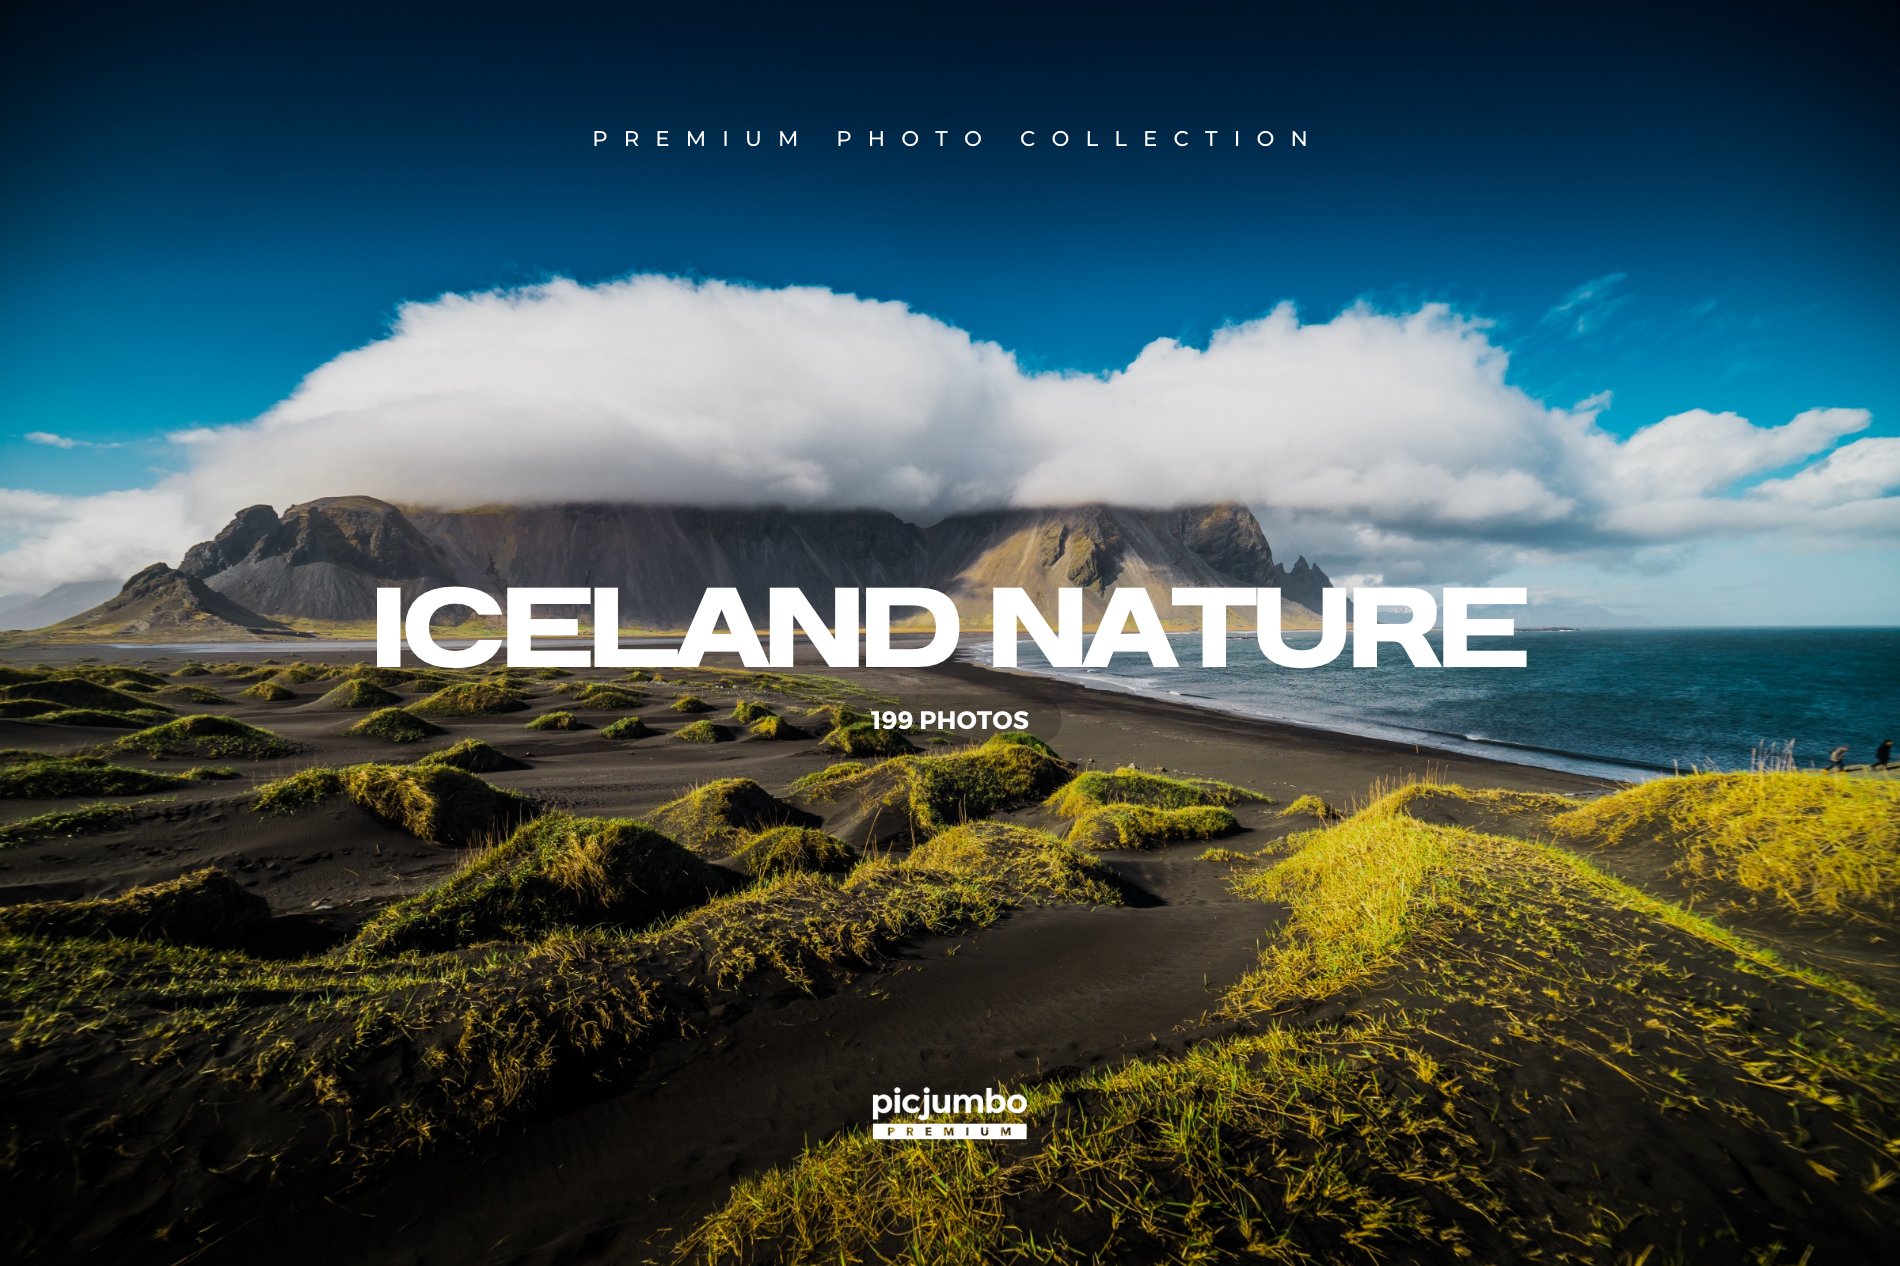 Iceland Nature Stock Photo Collection